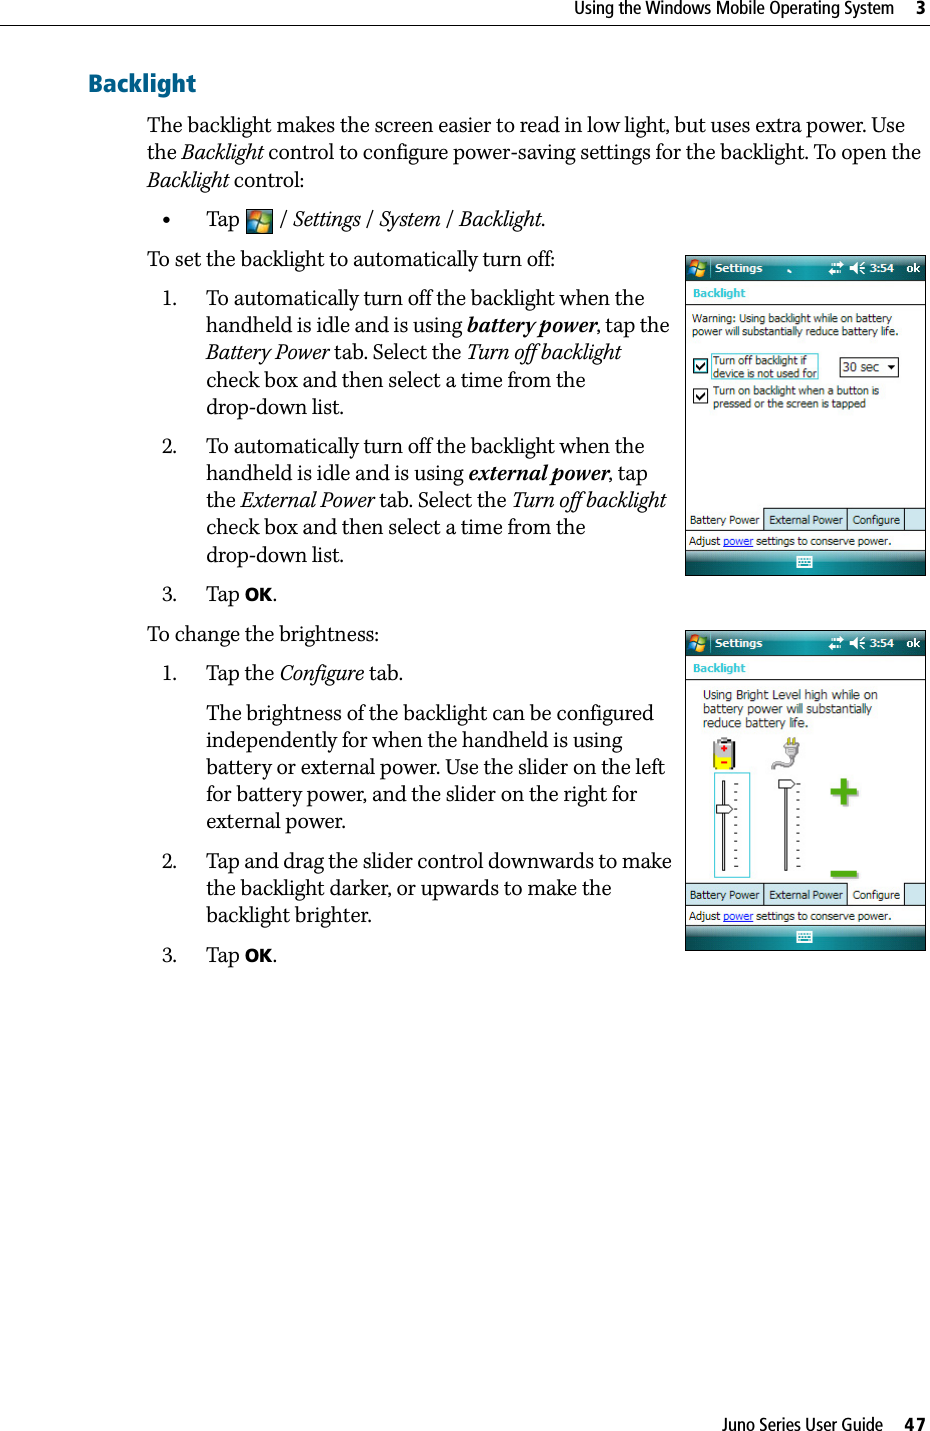 Juno Series User Guide     47Using the Windows Mobile Operating System     3BacklightThe backlight makes the screen easier to read in low light, but uses extra power. Use the Backlight control to configure power-saving settings for the backlight. To open the Backlight control: •Tap / Settings /System / Backlight. To set the backlight to automatically turn off: 1. To automatically turn off the backlight when the handheld is idle and is using battery power, tap the Battery Power tab. Select the Turn off backlight check box and then select a time from the drop-down list.2. To automatically turn off the backlight when the handheld is idle and is using external power, tap the External Power tab. Select the Turn off backlight check box and then select a time from the drop-down list.3. Tap OK.To change the brightness:1. Tap the Configure tab.The brightness of the backlight can be configured independently for when the handheld is using battery or external power. Use the slider on the left for battery power, and the slider on the right for external power.2. Tap and drag the slider control downwards to make the backlight darker, or upwards to make the backlight brighter. 3. Tap OK.